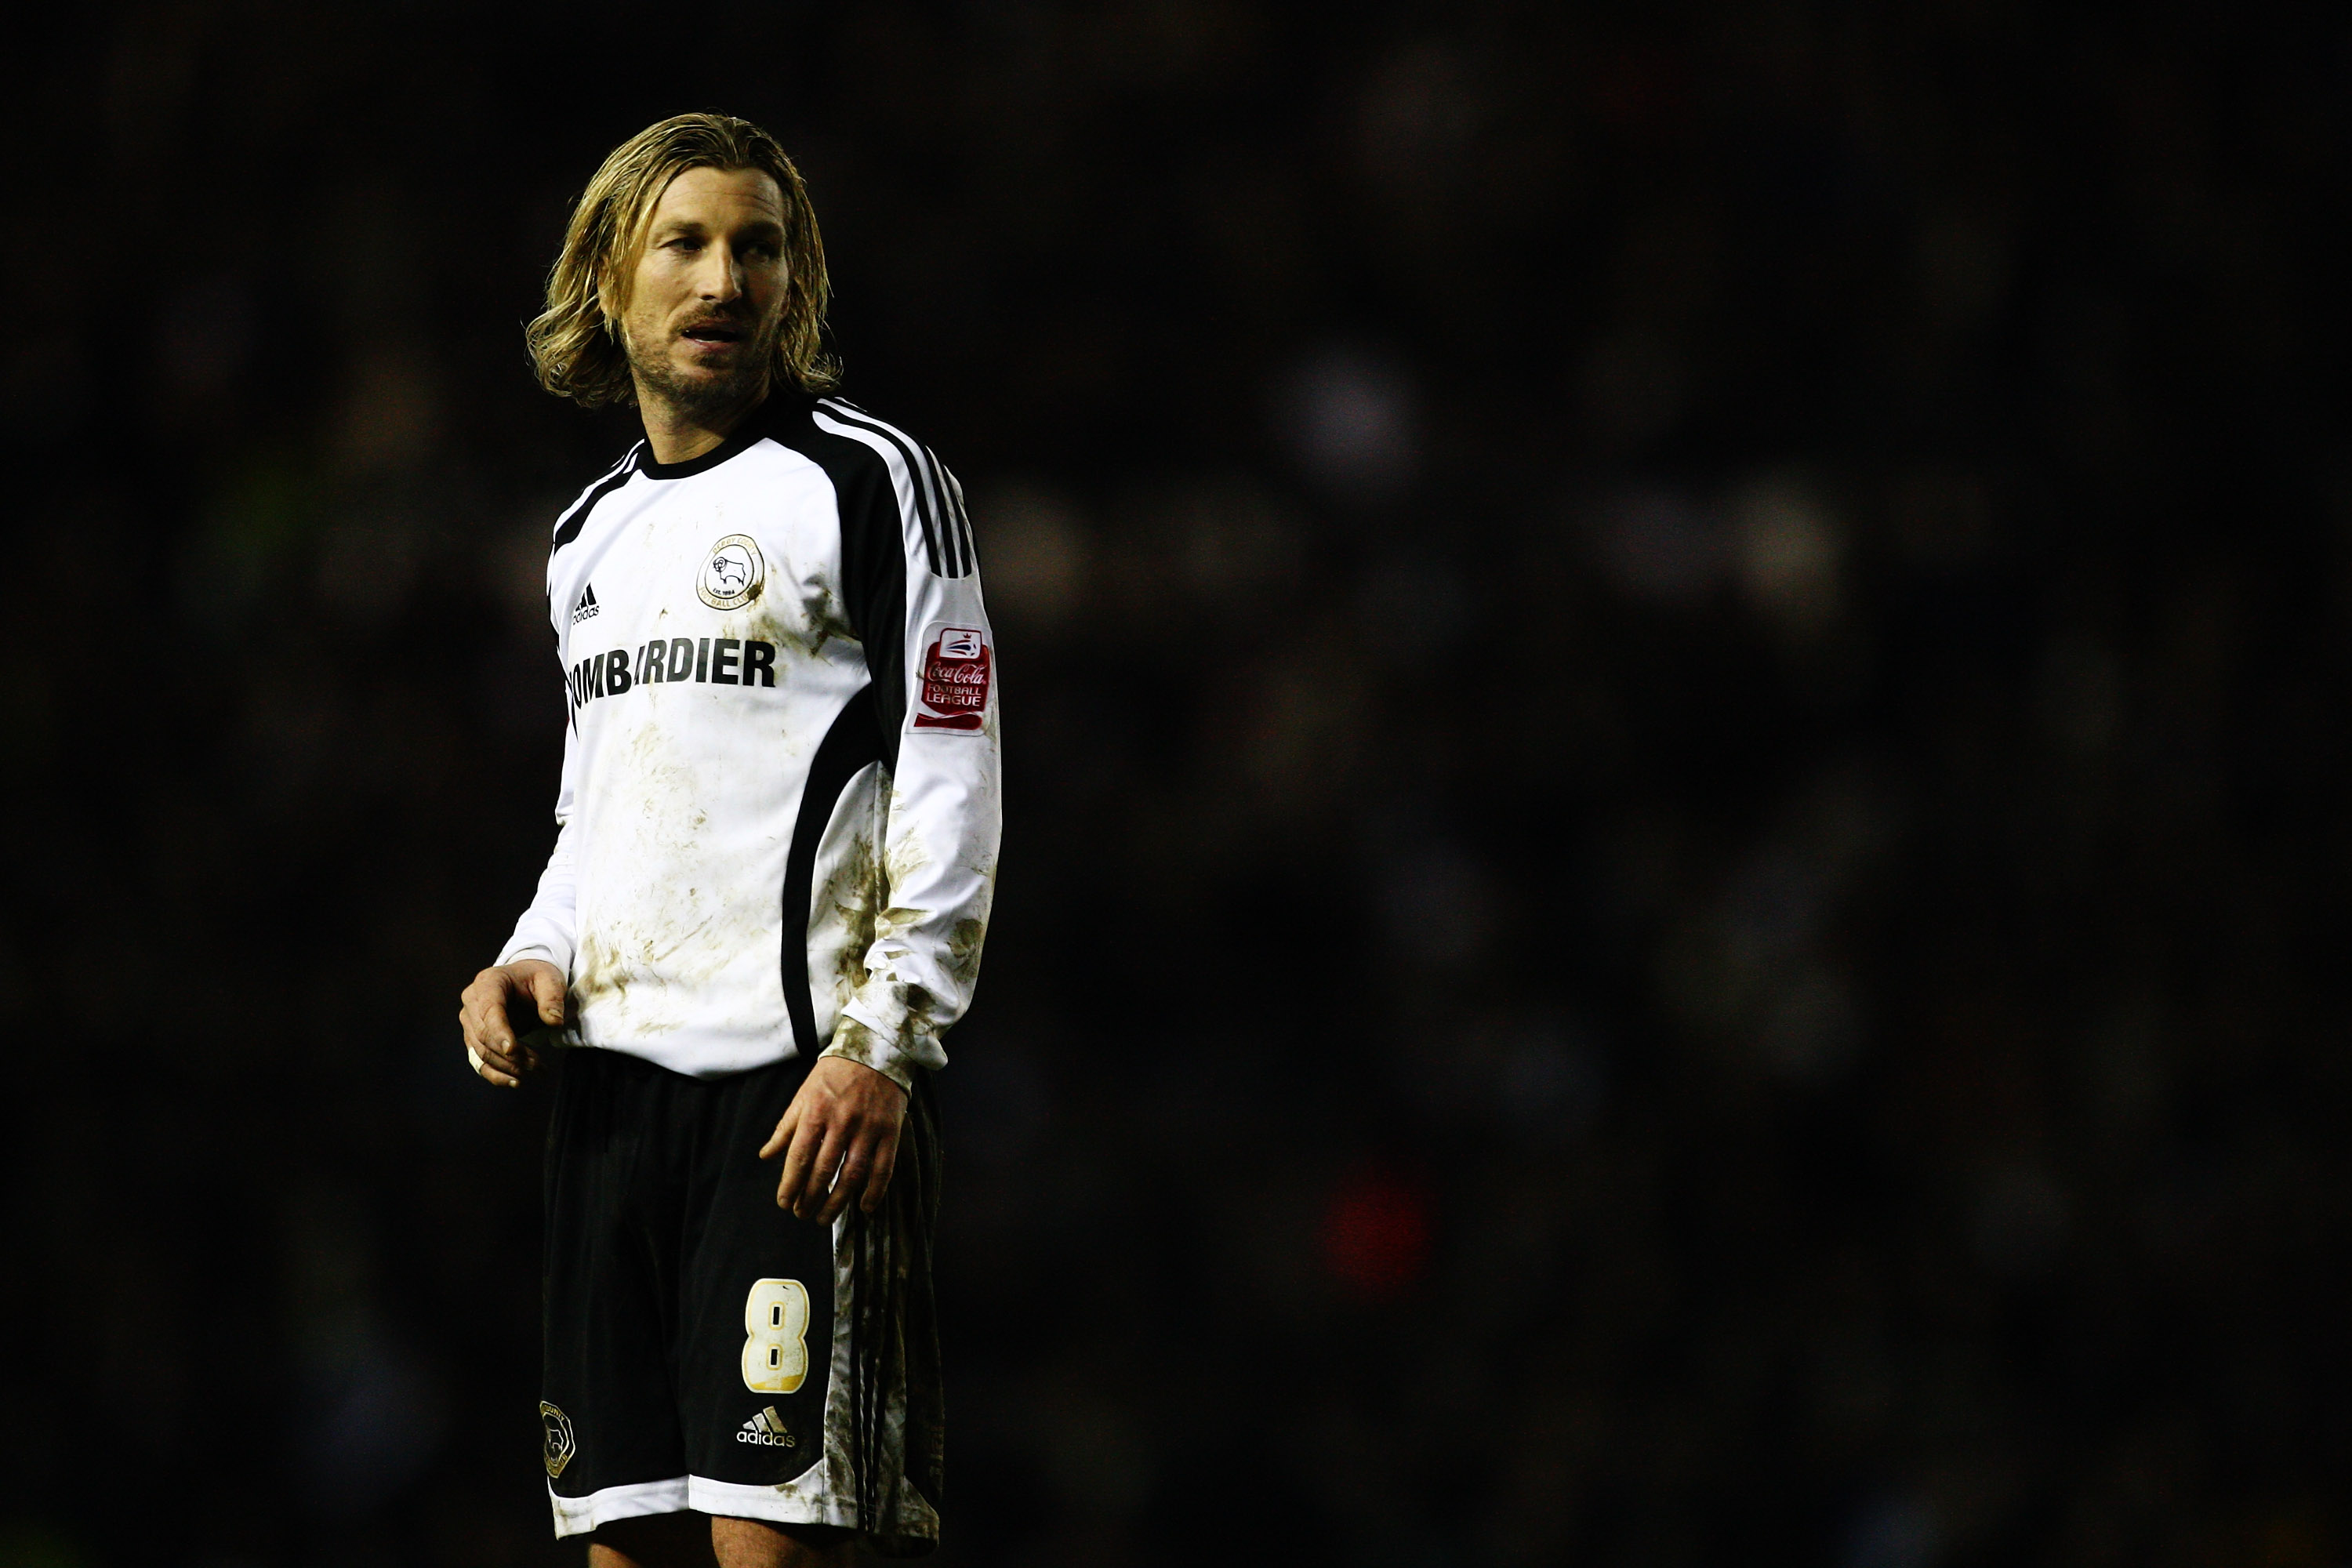 DERBY, UNITED KINGDOM - JANUARY 23:  Robbie Savage of Derby County looks on during the the FA Cup Sponsored by E.on fourth round match between Derby County and Nottingham Forest at Pride Park on January 23, 2009 in Derby, England.  (Photo by Laurence Grif